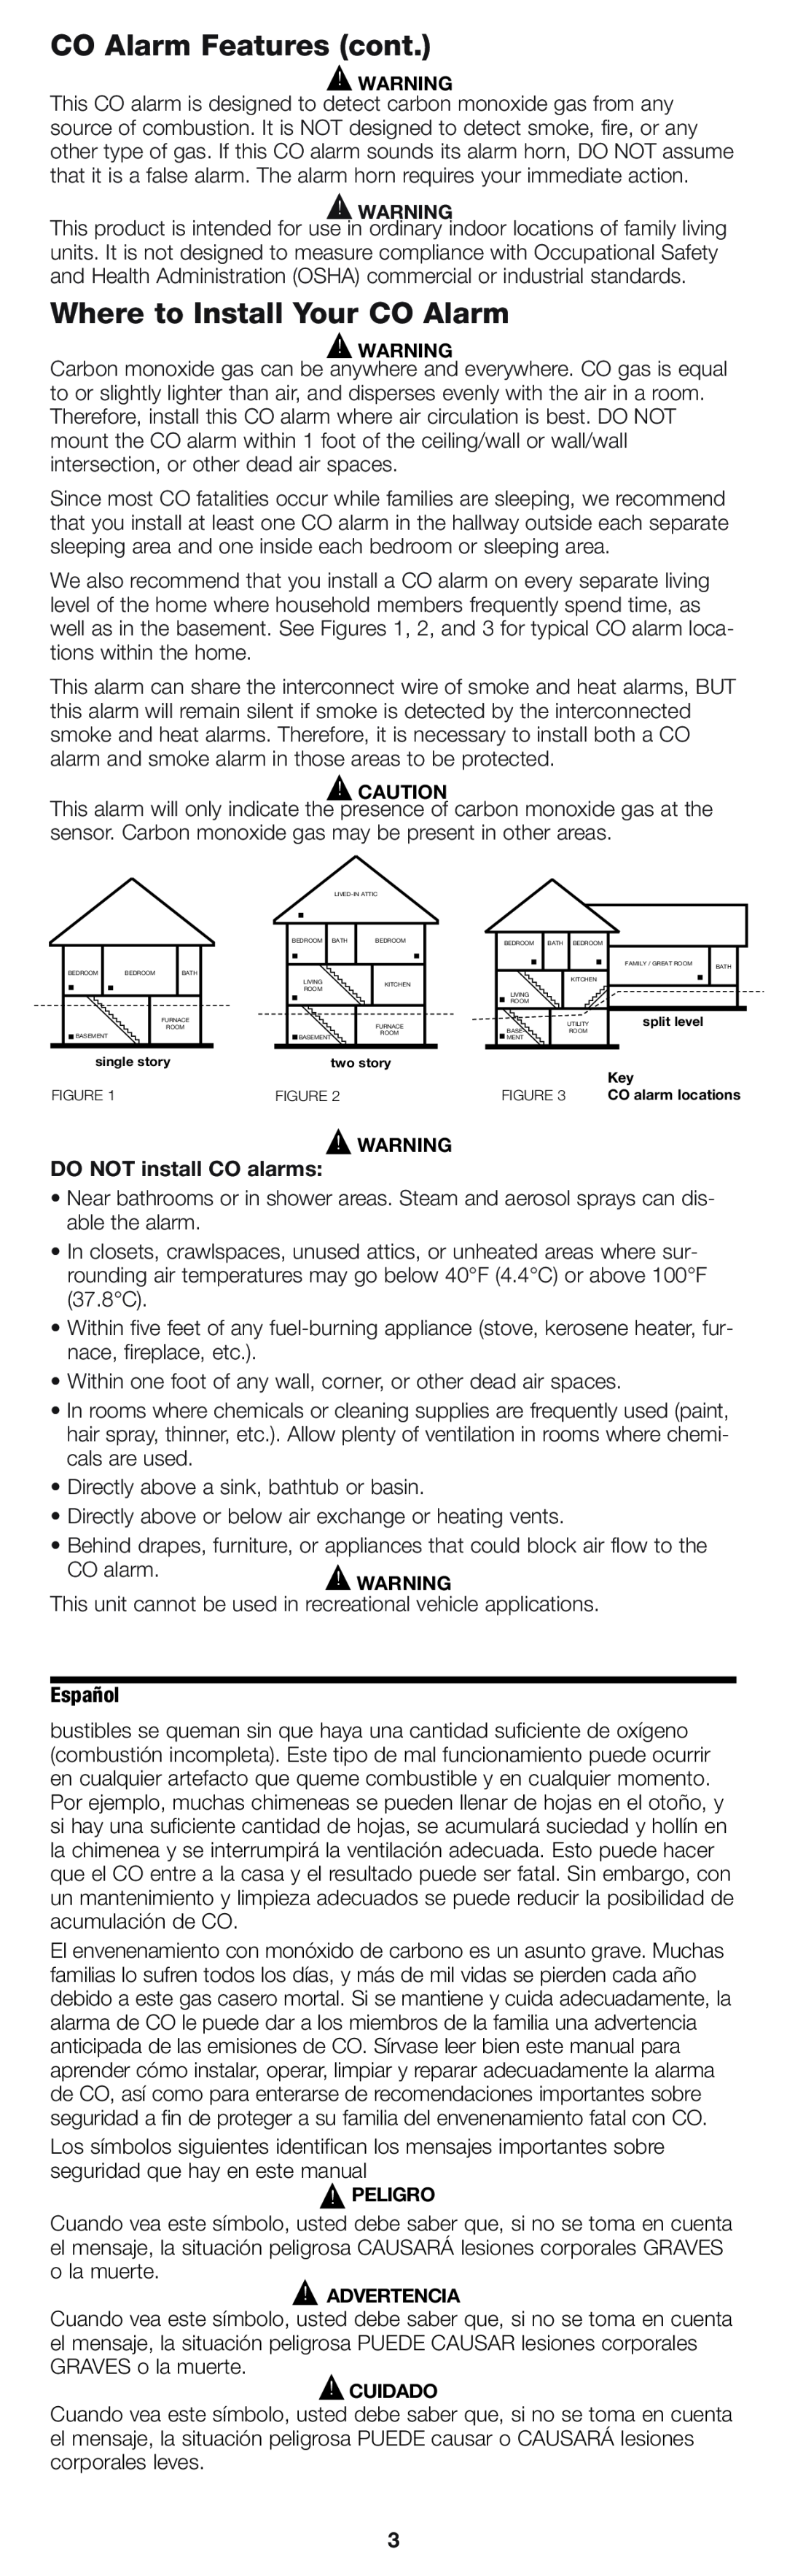 Firex pmn owner manual CO Alarm Features cont, Where to Install Your CO Alarm, DO NOT install CO alarms 